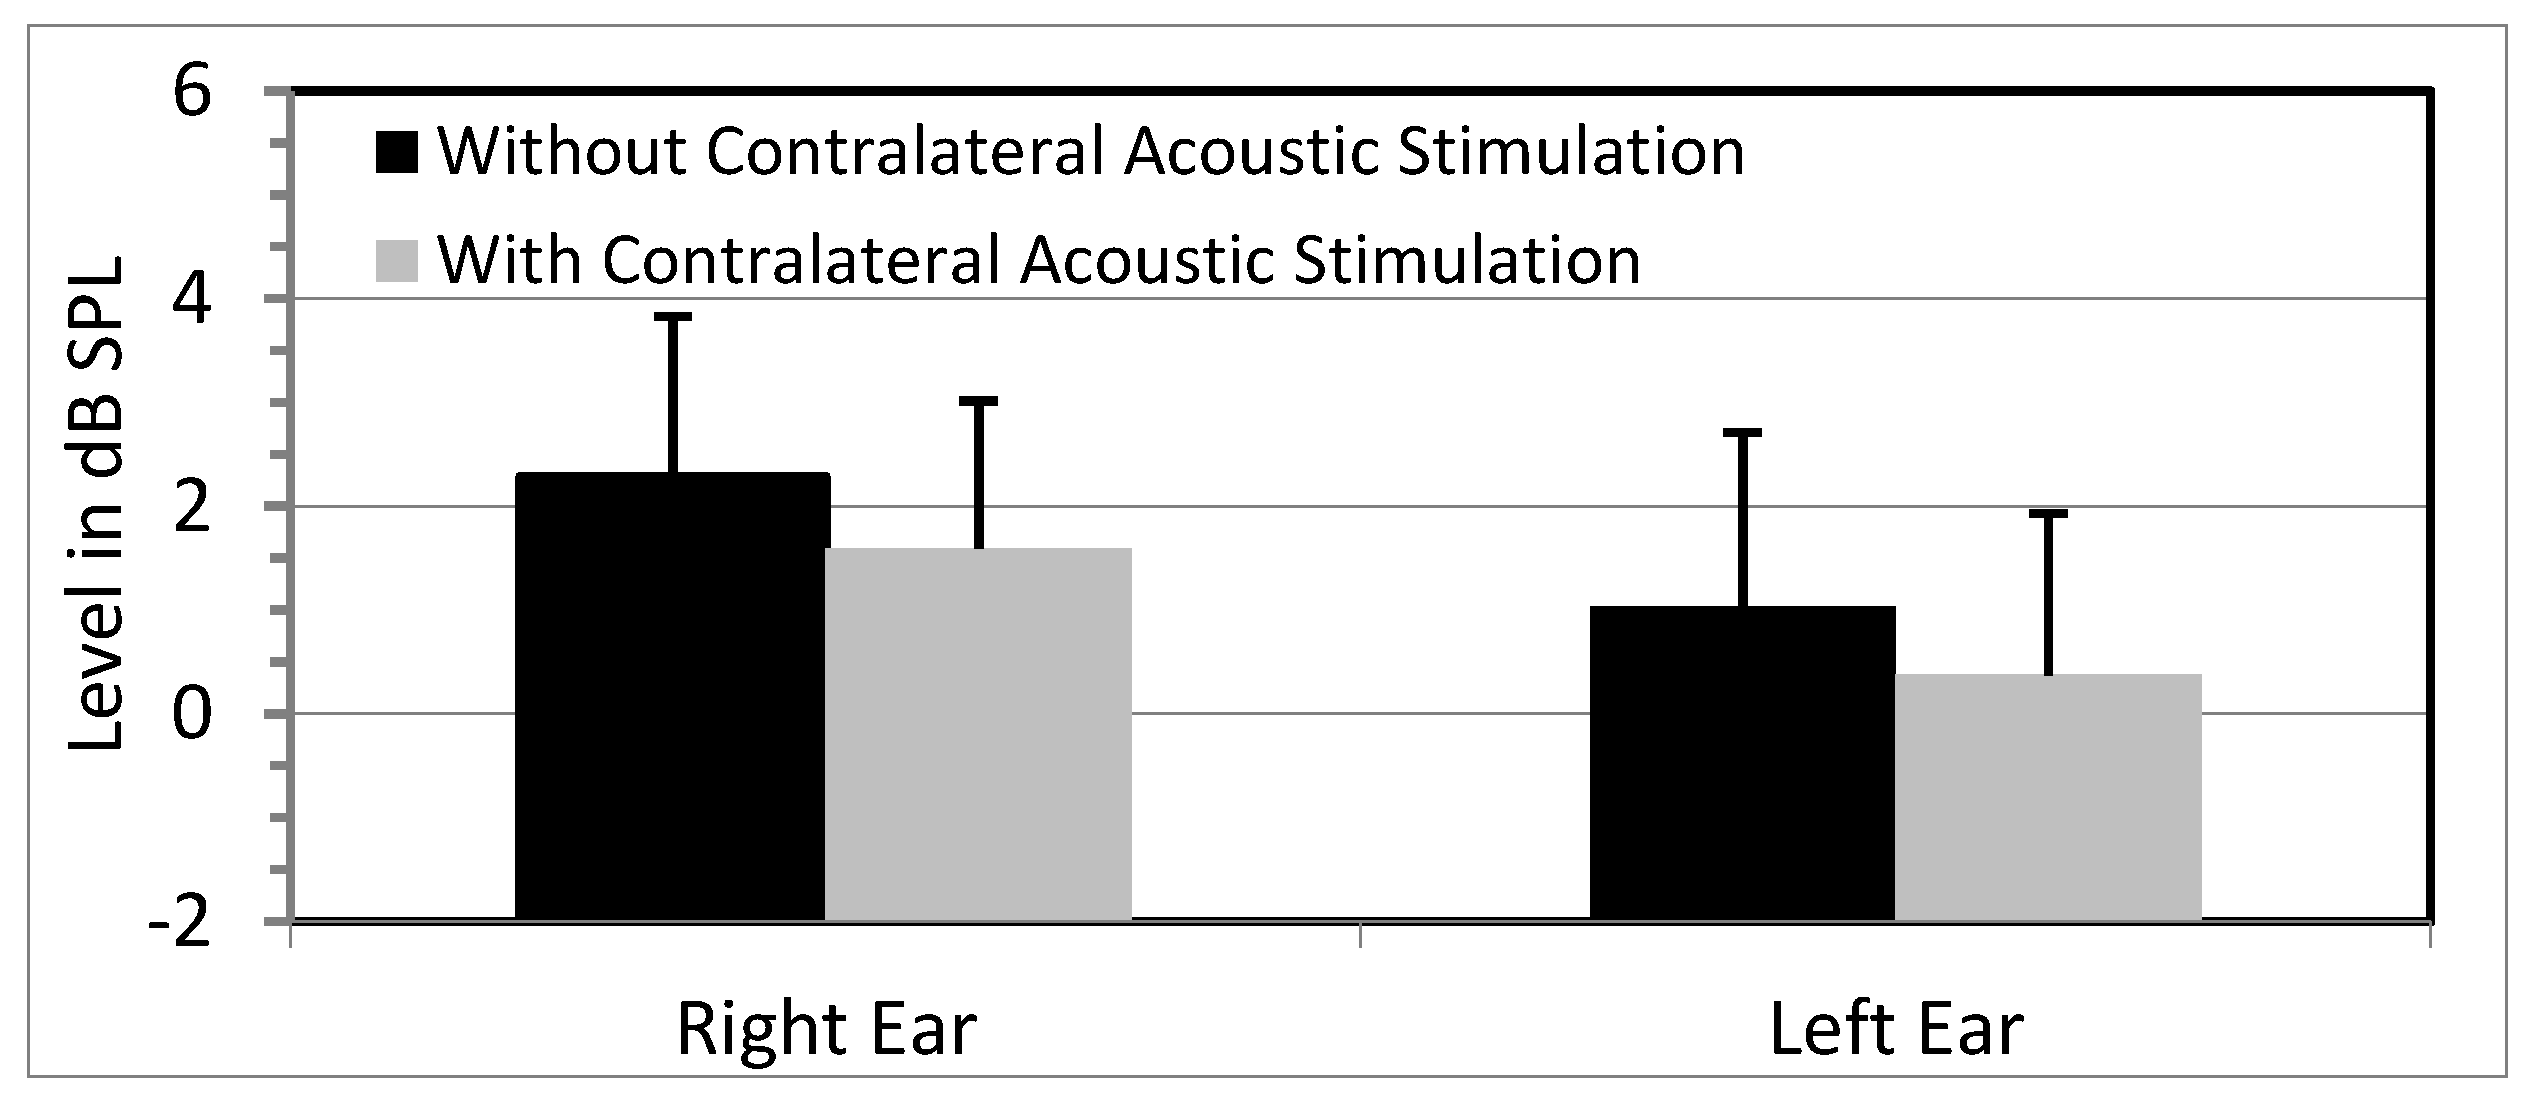 Acoustic Immittance in children without otoacoustic emissions